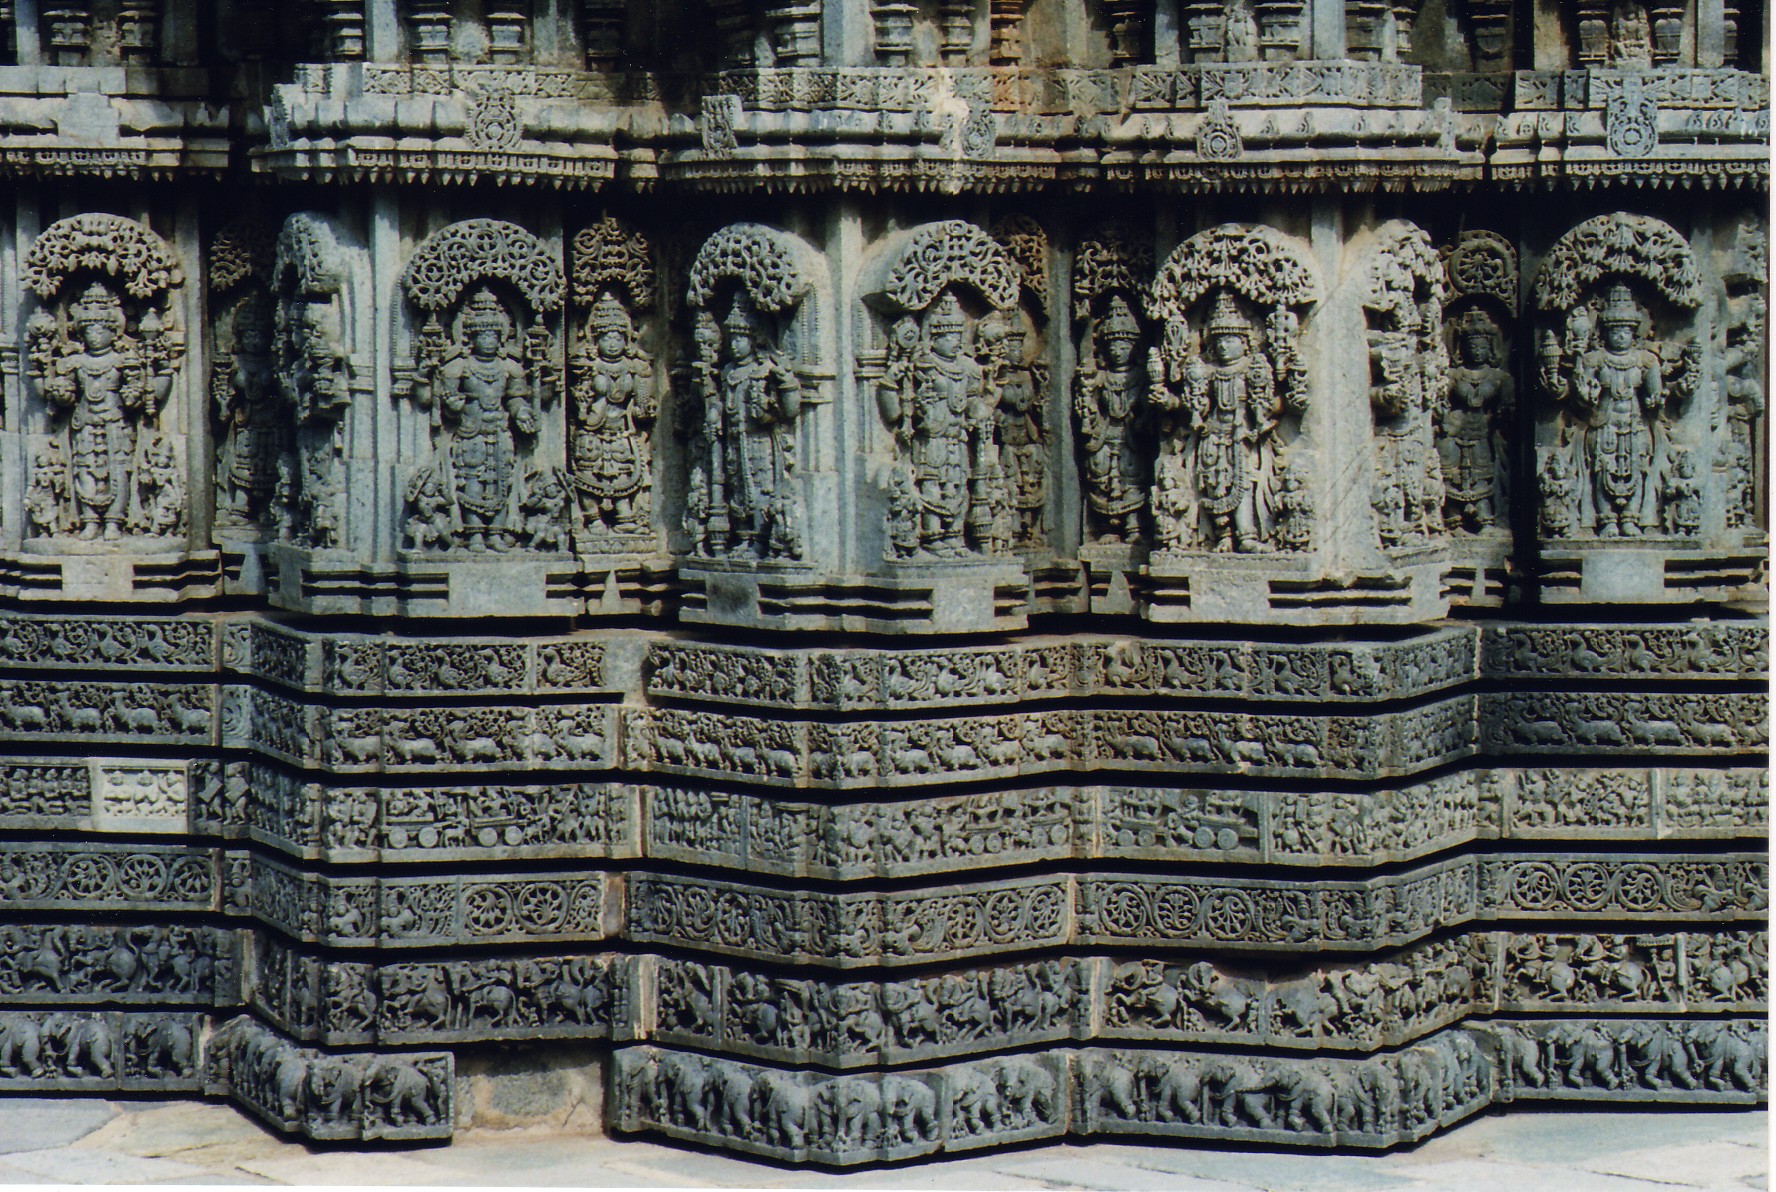 Wall_sculptures_and_molding_frieze_in_relief_in_the_Chennakeshava_temple_at_Somanathapura.jpg